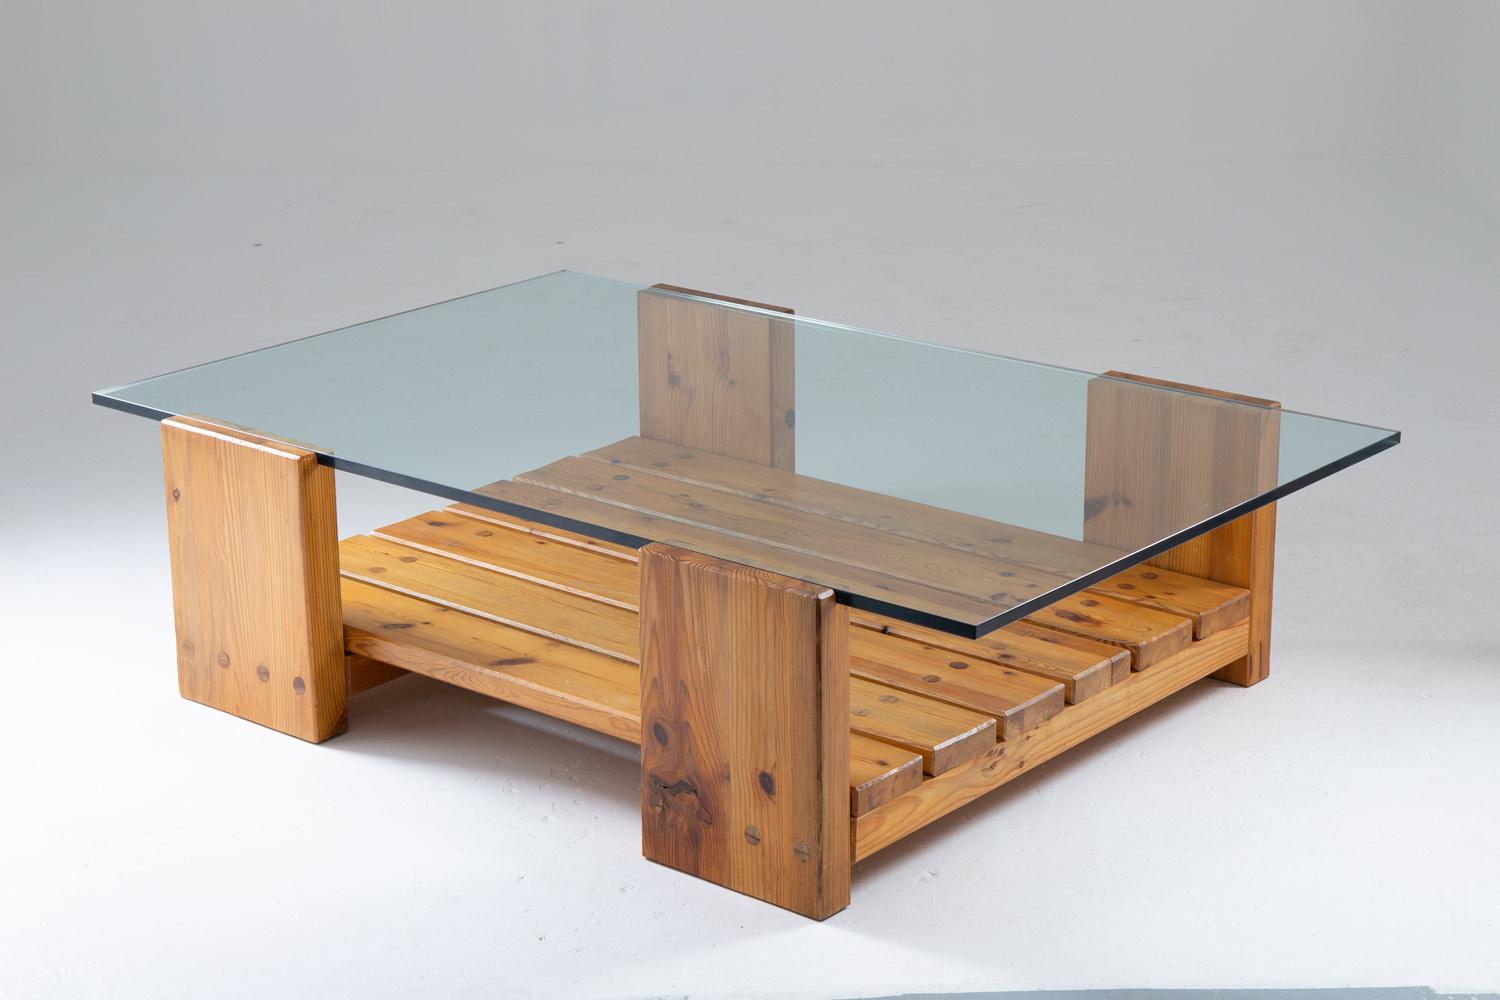 Rare coffee table in pine and glass by Sven Larsson, Sweden, circa 1970. 
This table is a great example of the robust pine furniture era that grew popular in Sweden in the late 1960s. The table consists of a thick glass plate, resting on a frame in